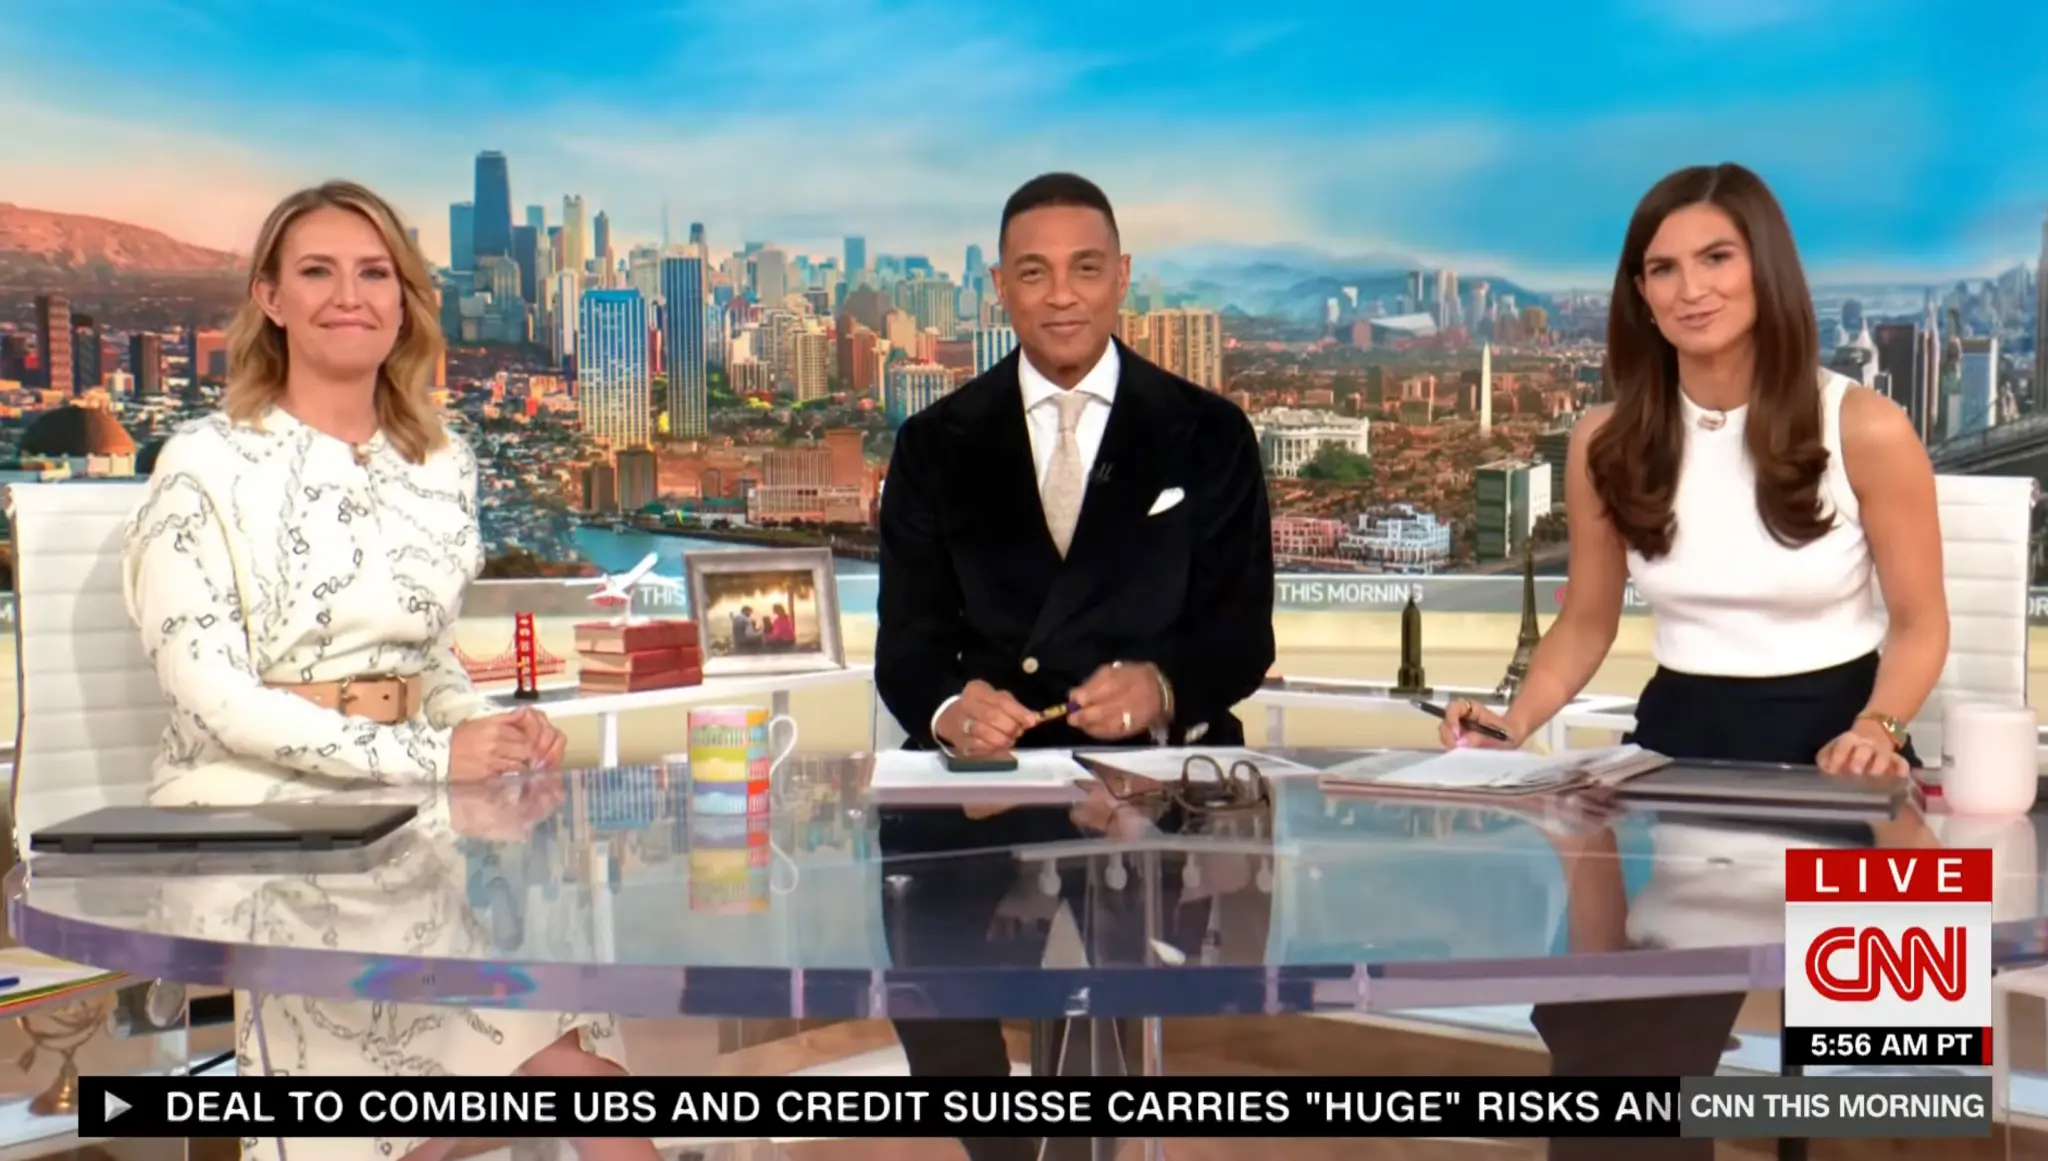 Don Lemon signs off from his morning show on CNN